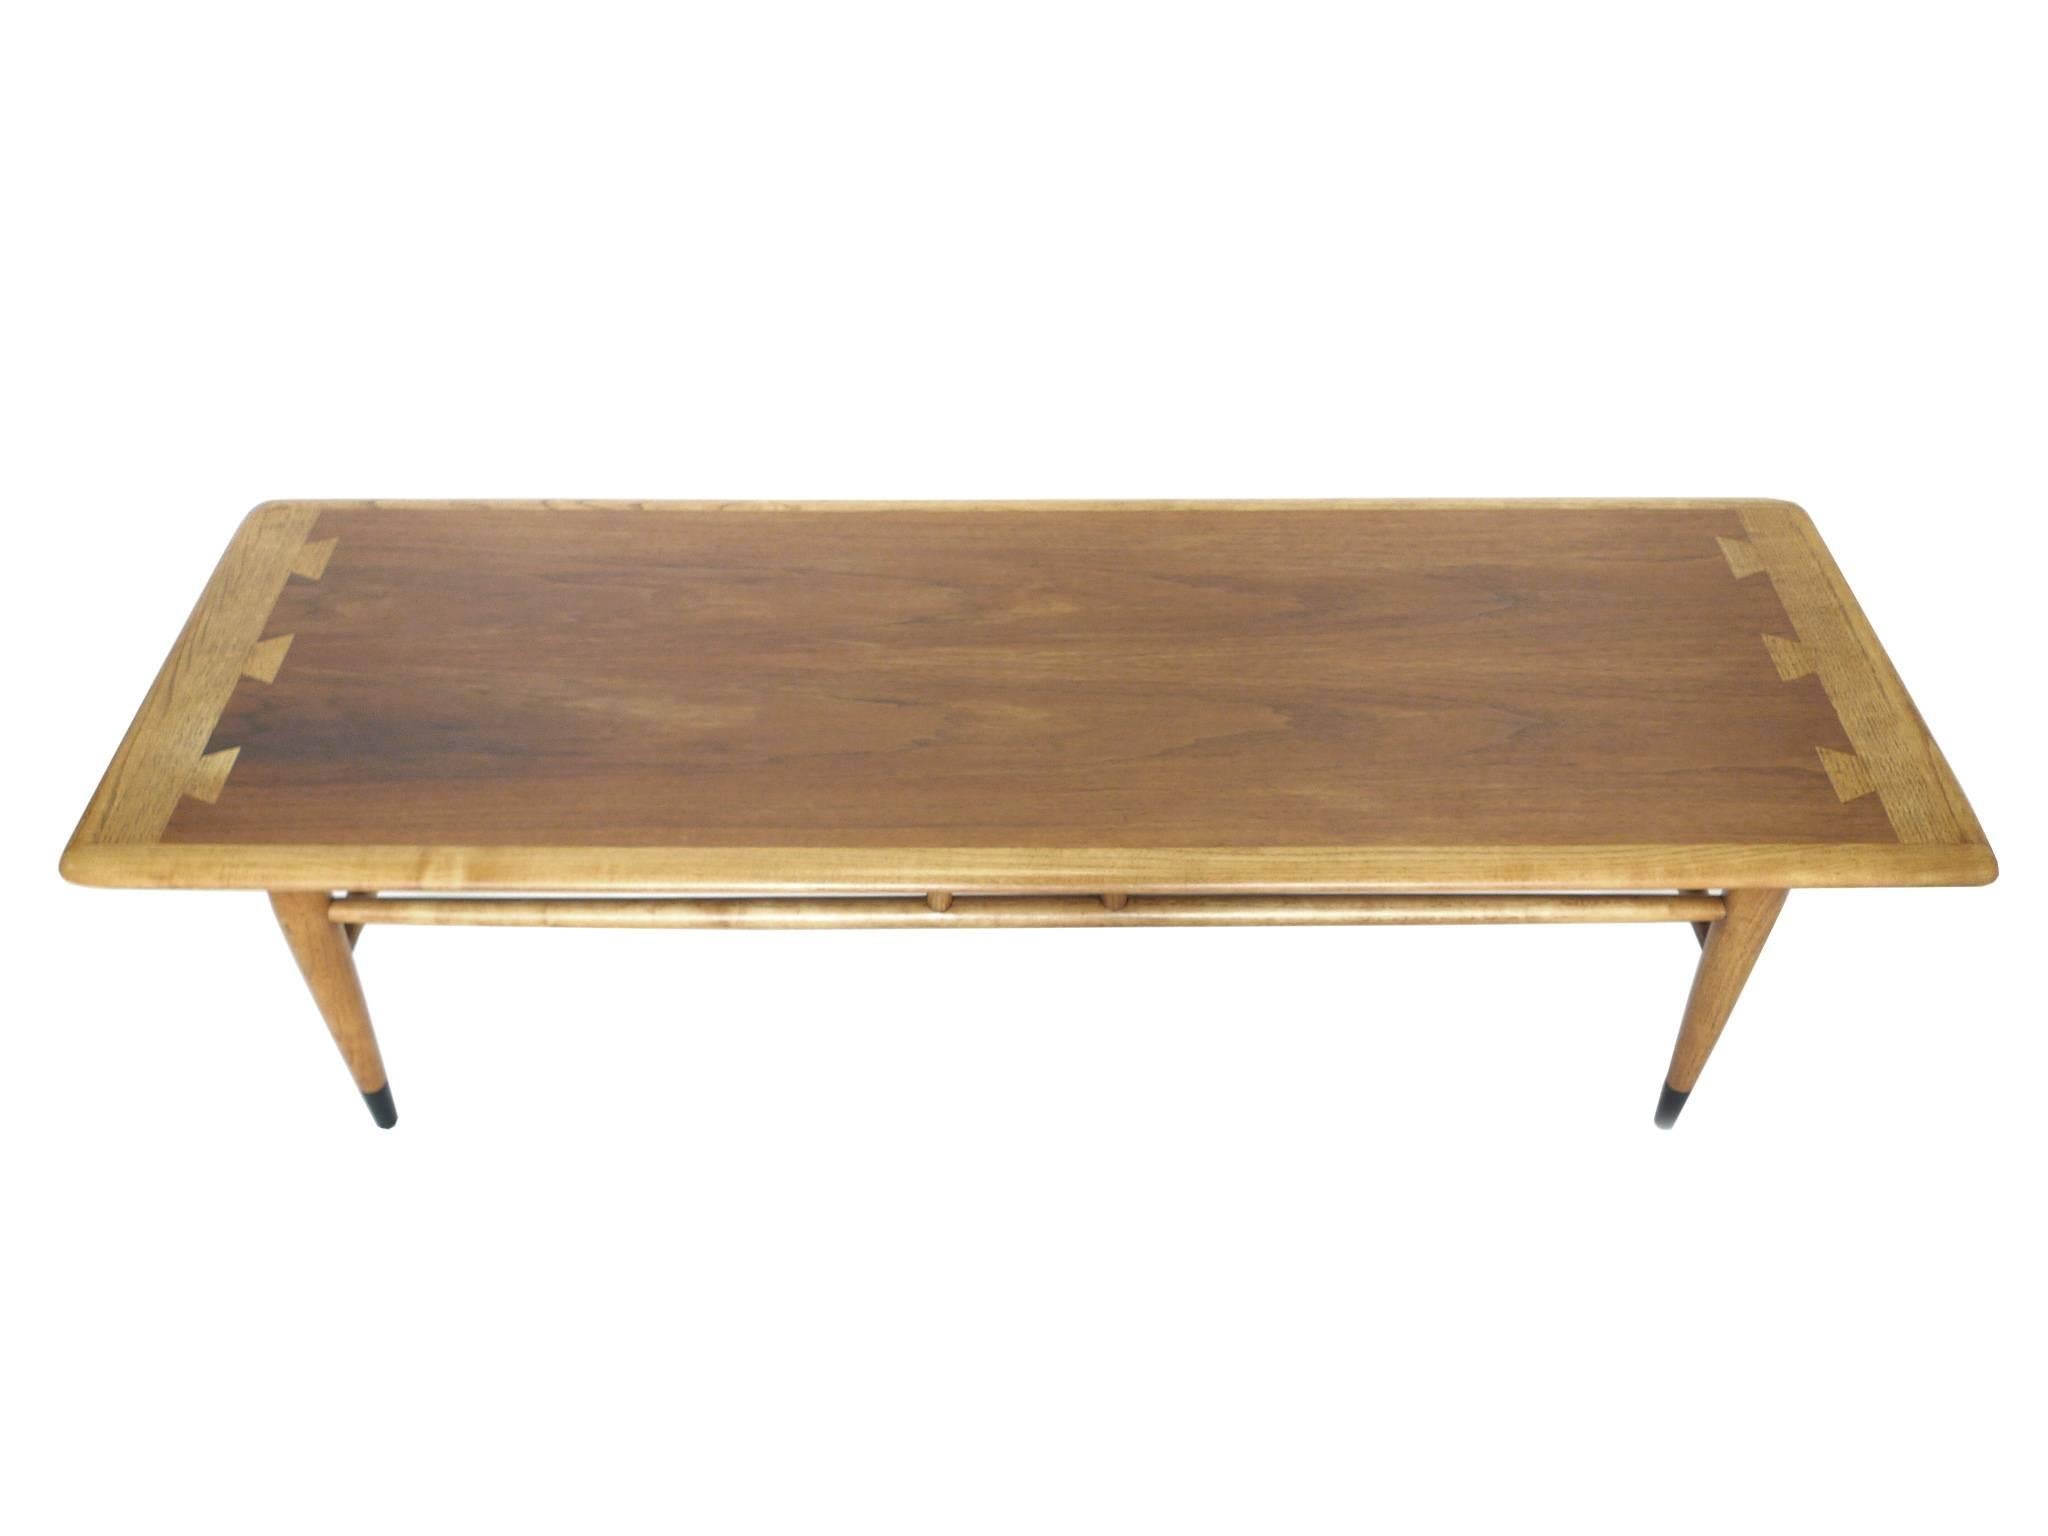 This Mid-Century coffee table manufactured by Lane Furniture is iconic for its two-toned wood top, pieced together with beautiful dovetail joints. This table is newly refinished, accentuating the rich grains of the wood. Other outstanding design